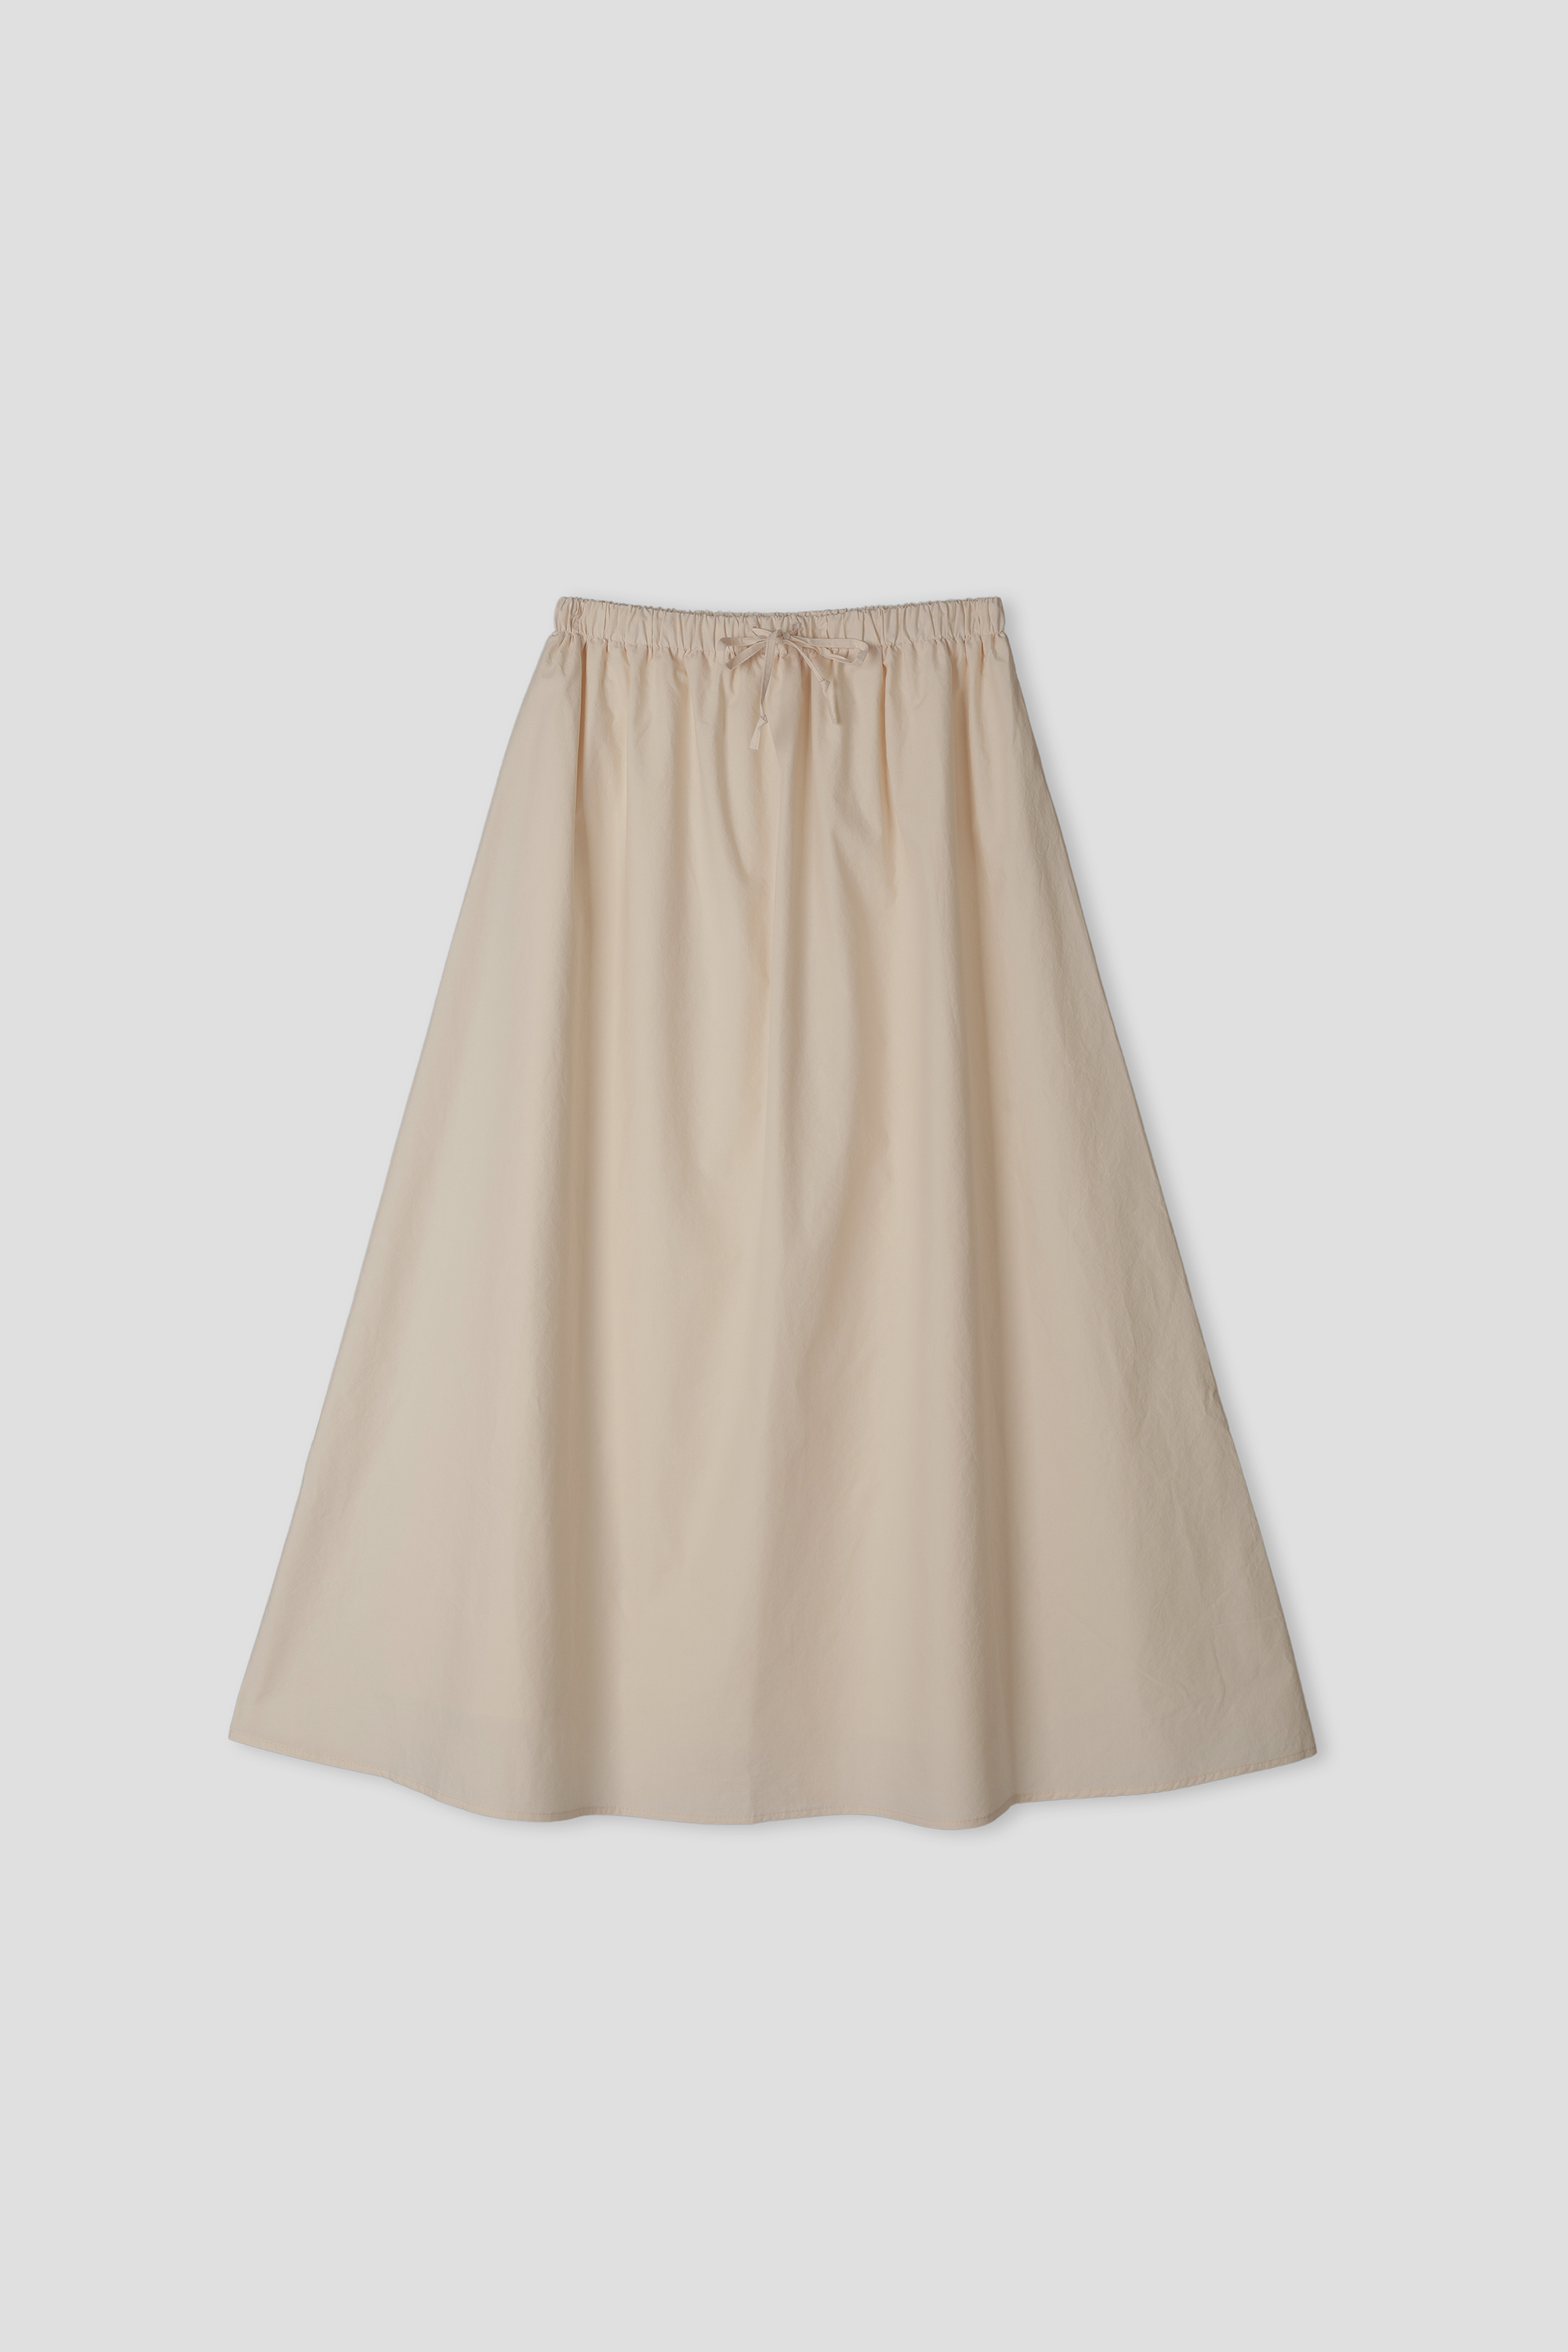 [ITV] French skirt [2colors]